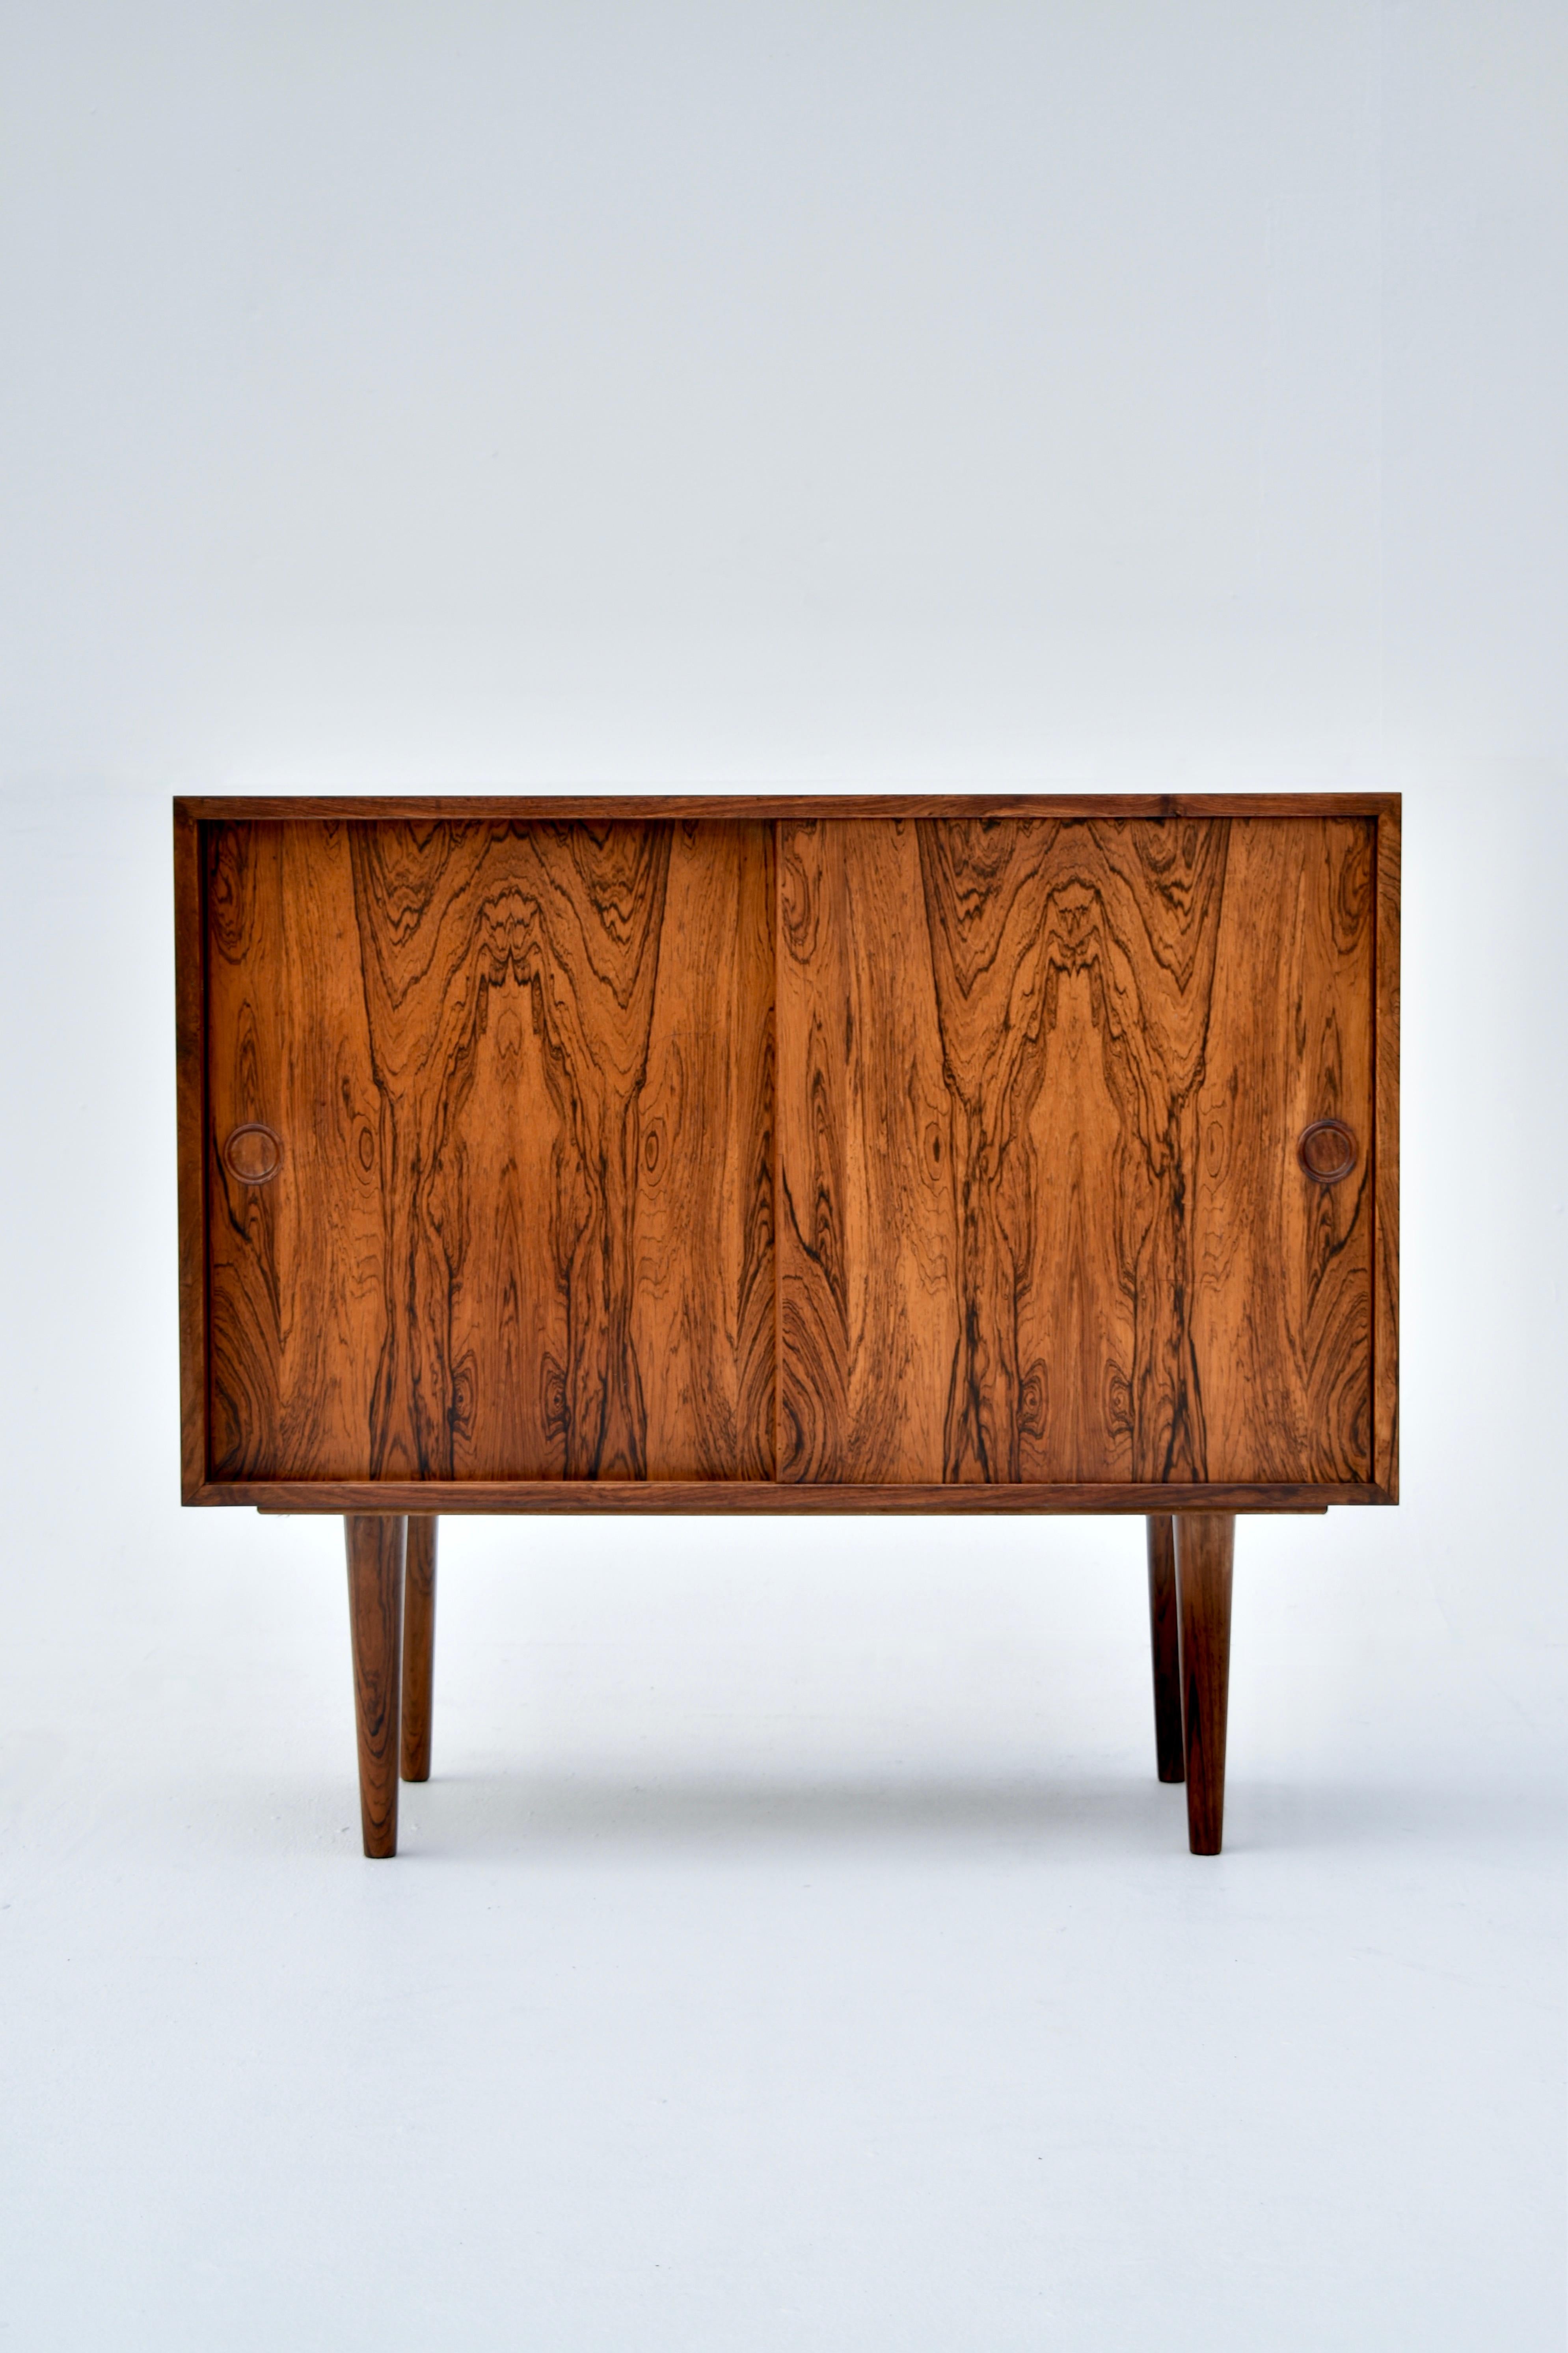 Beautiful little sideboard designed by Kai Kristiansen for Feldballes Møbelfabrik in the mid 50’s.

This particular example has the most dramatic timber grain we have seen on this design, it is absolutely stunning. The interior is also lined with